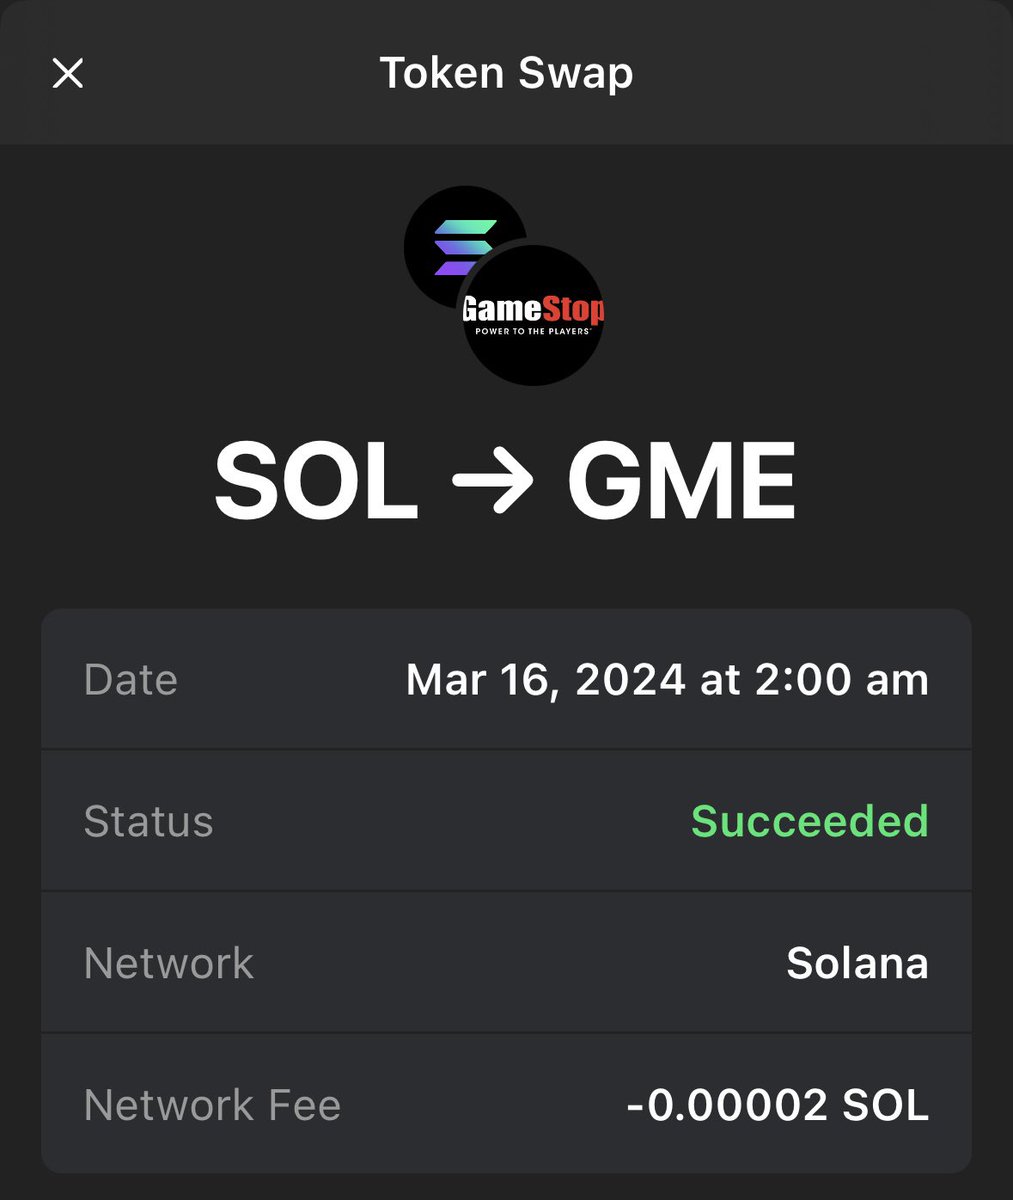 OMG!! I can't believe it! 😱

Back in March, I bought some $GME just for fun and totally forgot about it. Today, I randomly checked and it's up 10X! 🤯

#GameStop is all over the news and #GME is listed on so many exchanges now. Could this be the next $BOME, $PEPE or $WIF? 🚀🚀🚀